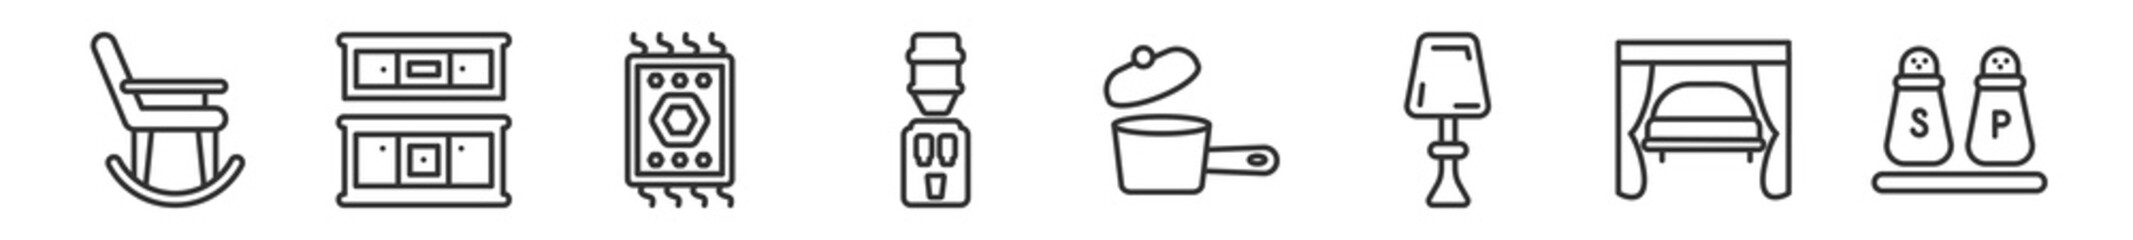 outline set of furniture and household line icons. linear vector icons such as rocking chair, cabinets, rug, water dispenser, small saucepan, salt and pepper shakers. vector illustration.